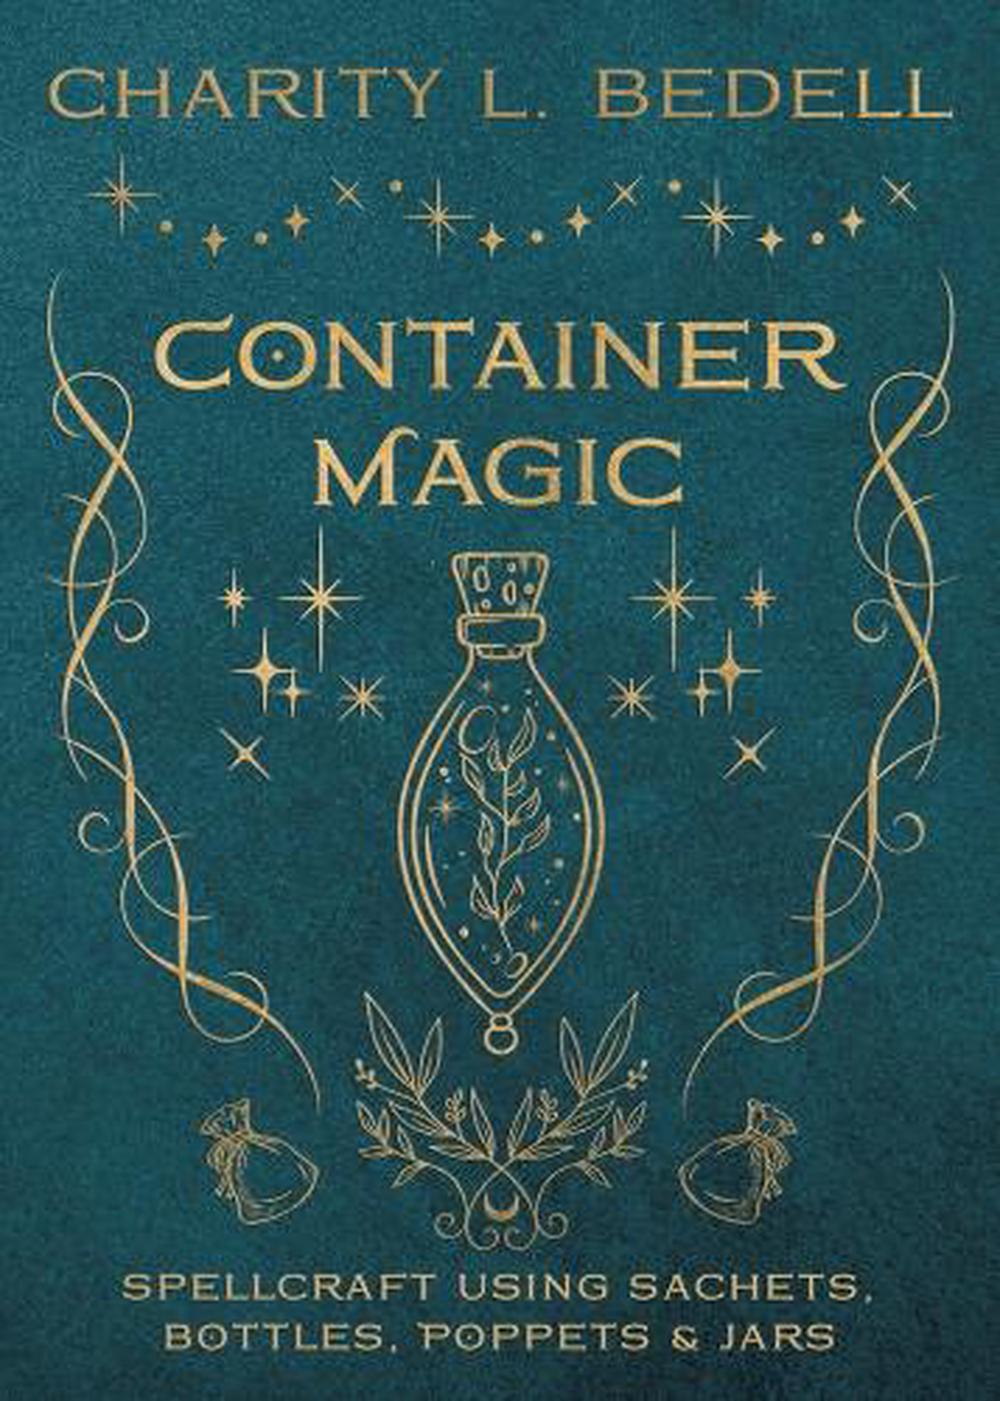 Container Magic: Spellcraft Using Sachets, Bottles, Poppets & Jars - Charity L Bedell